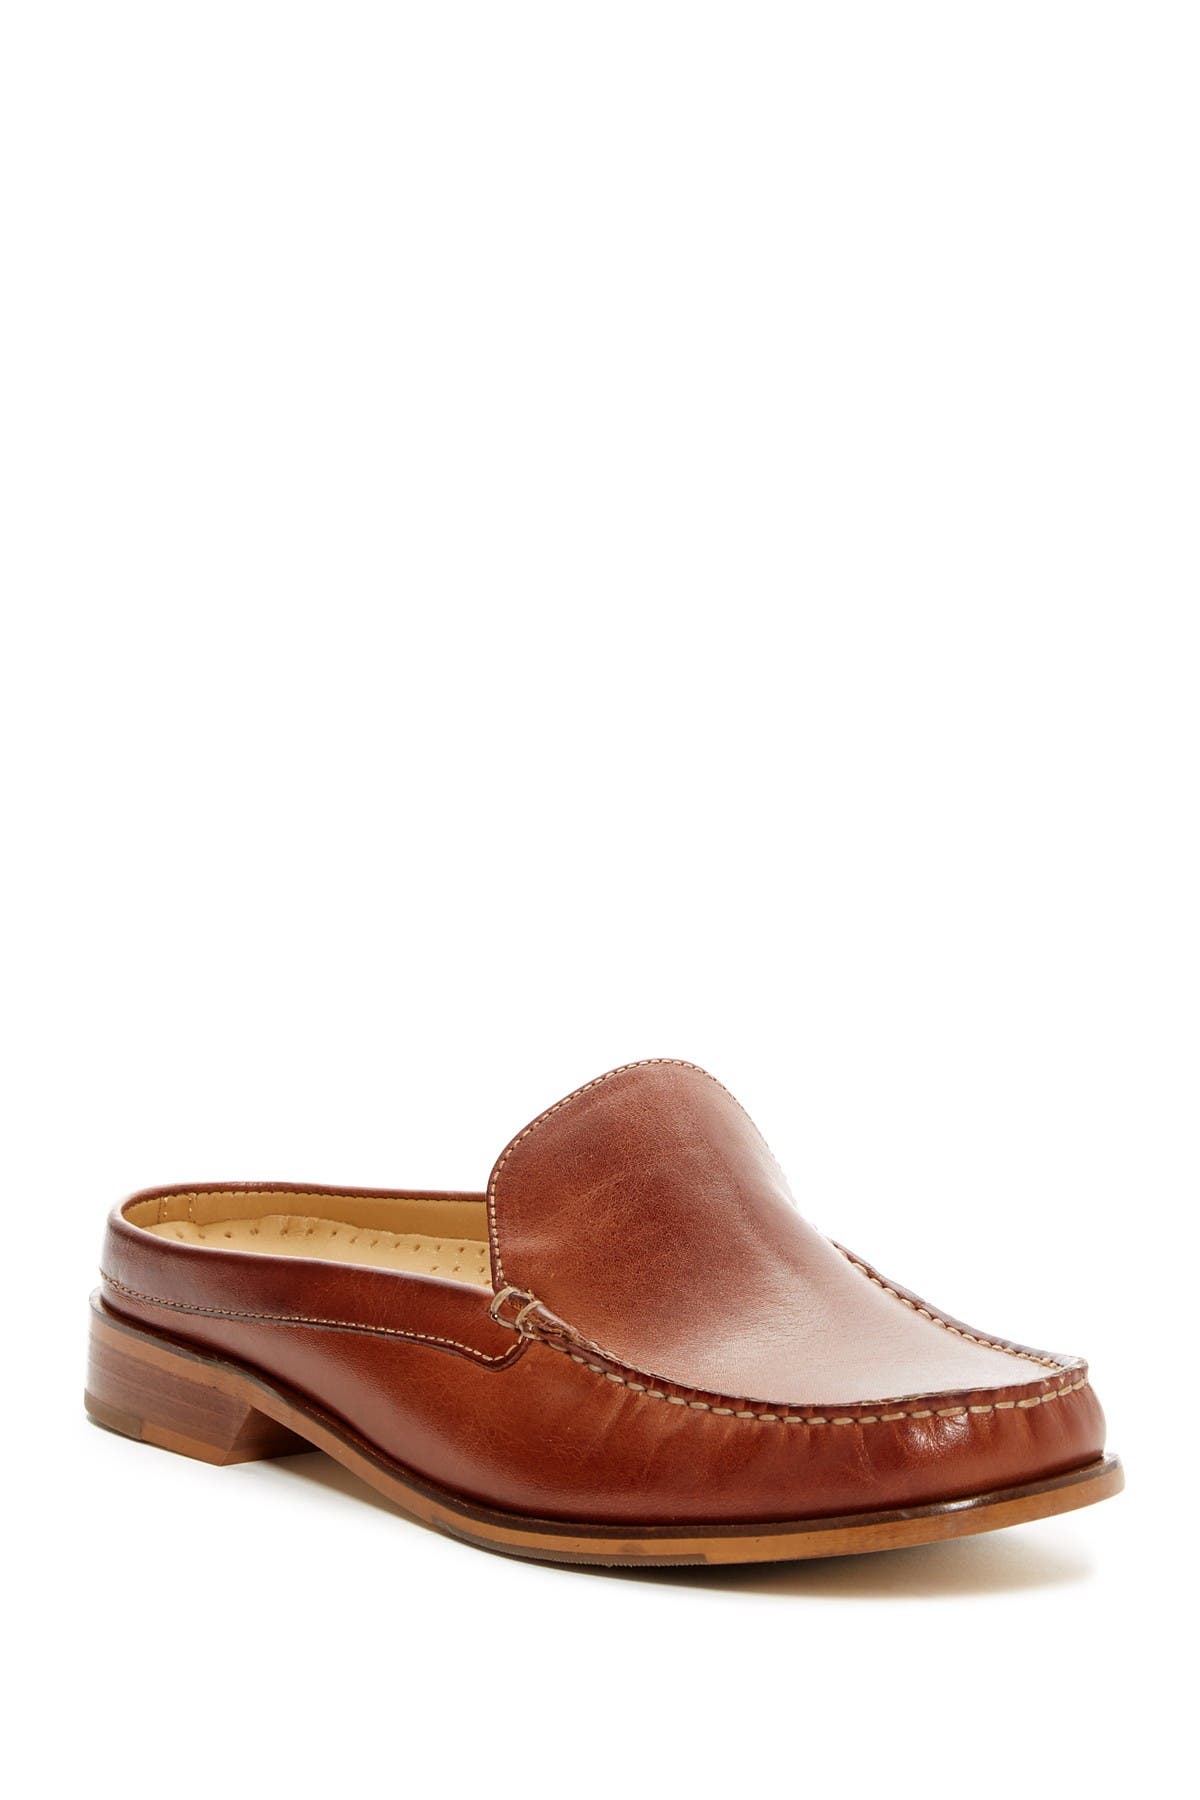 cole haan square toe